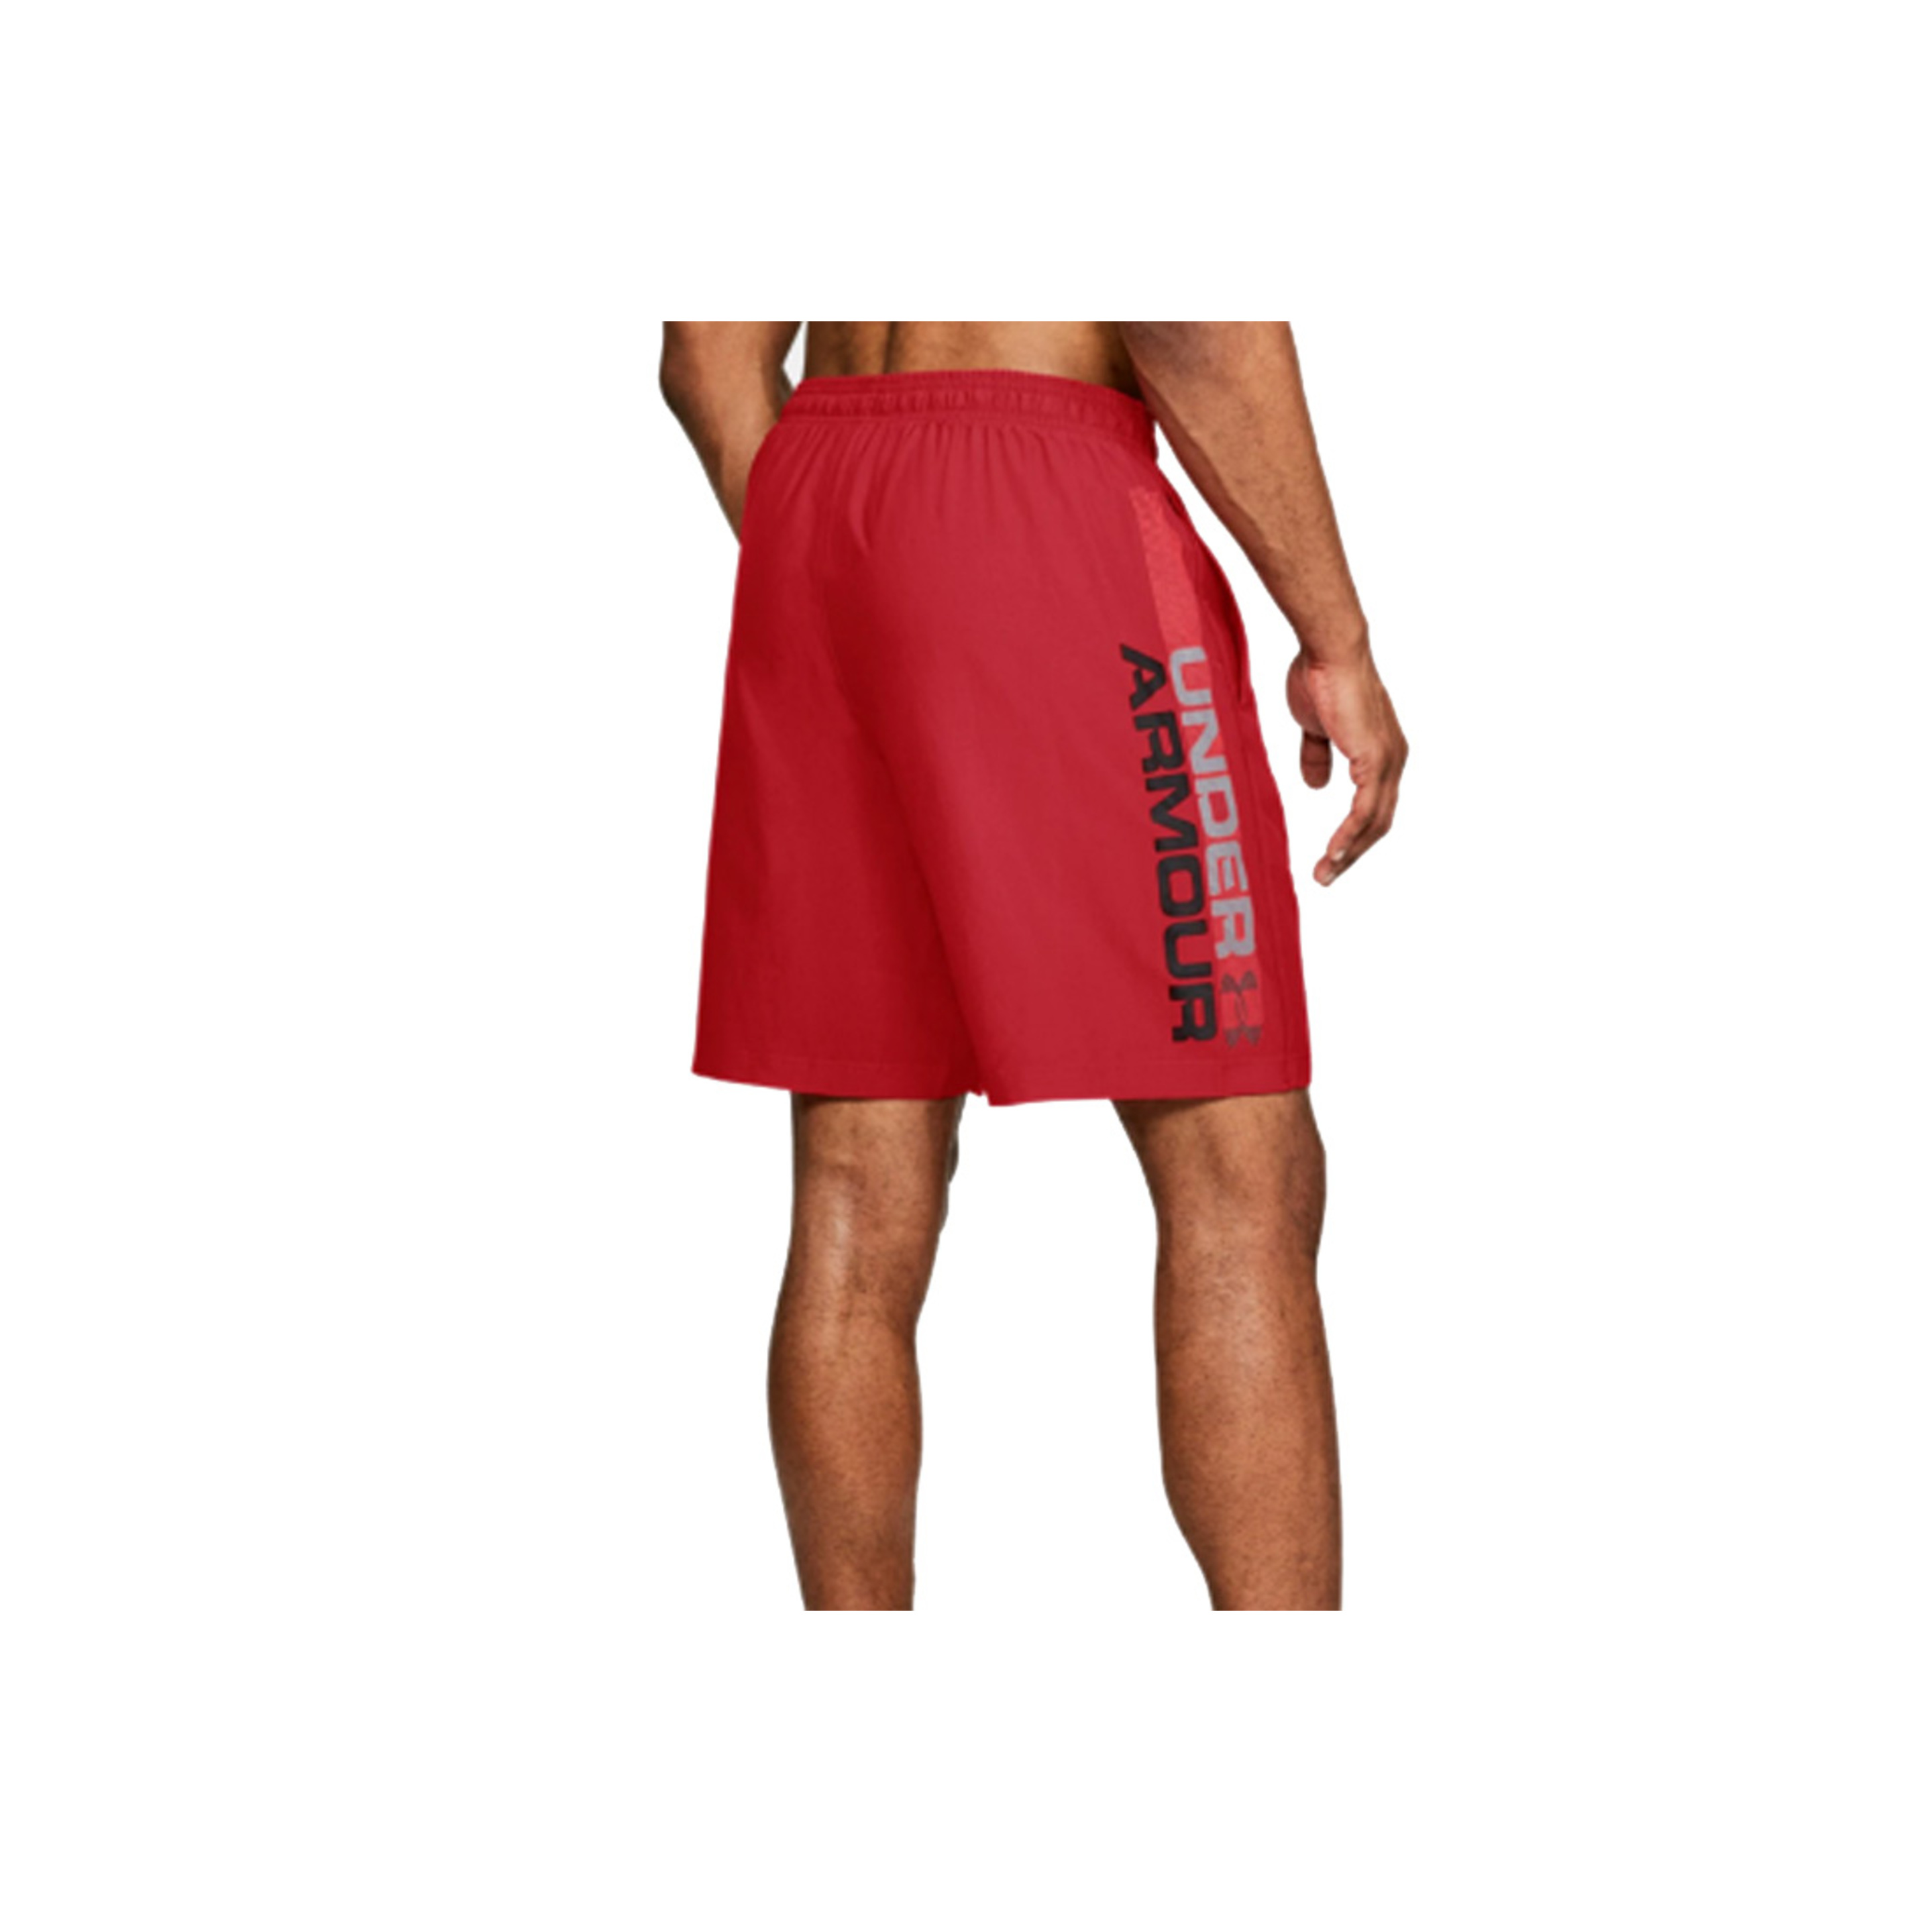 Under Armour Woven Graphic Wordmark Shorts 1320203-600